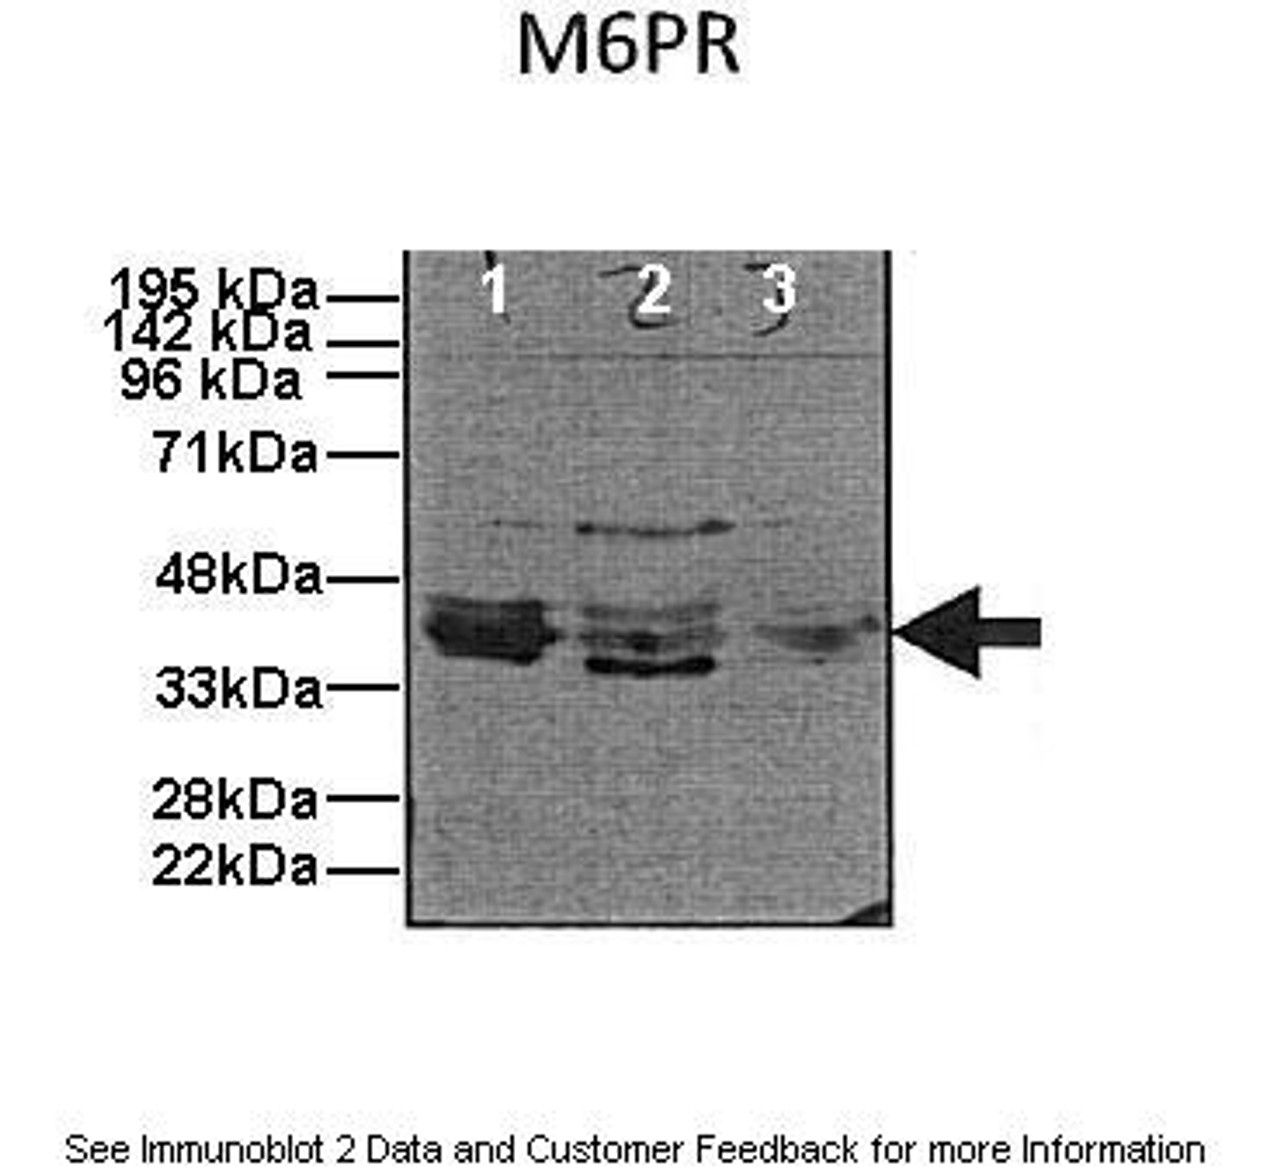 Antibody used in WB on Human, Mouse cell lines.